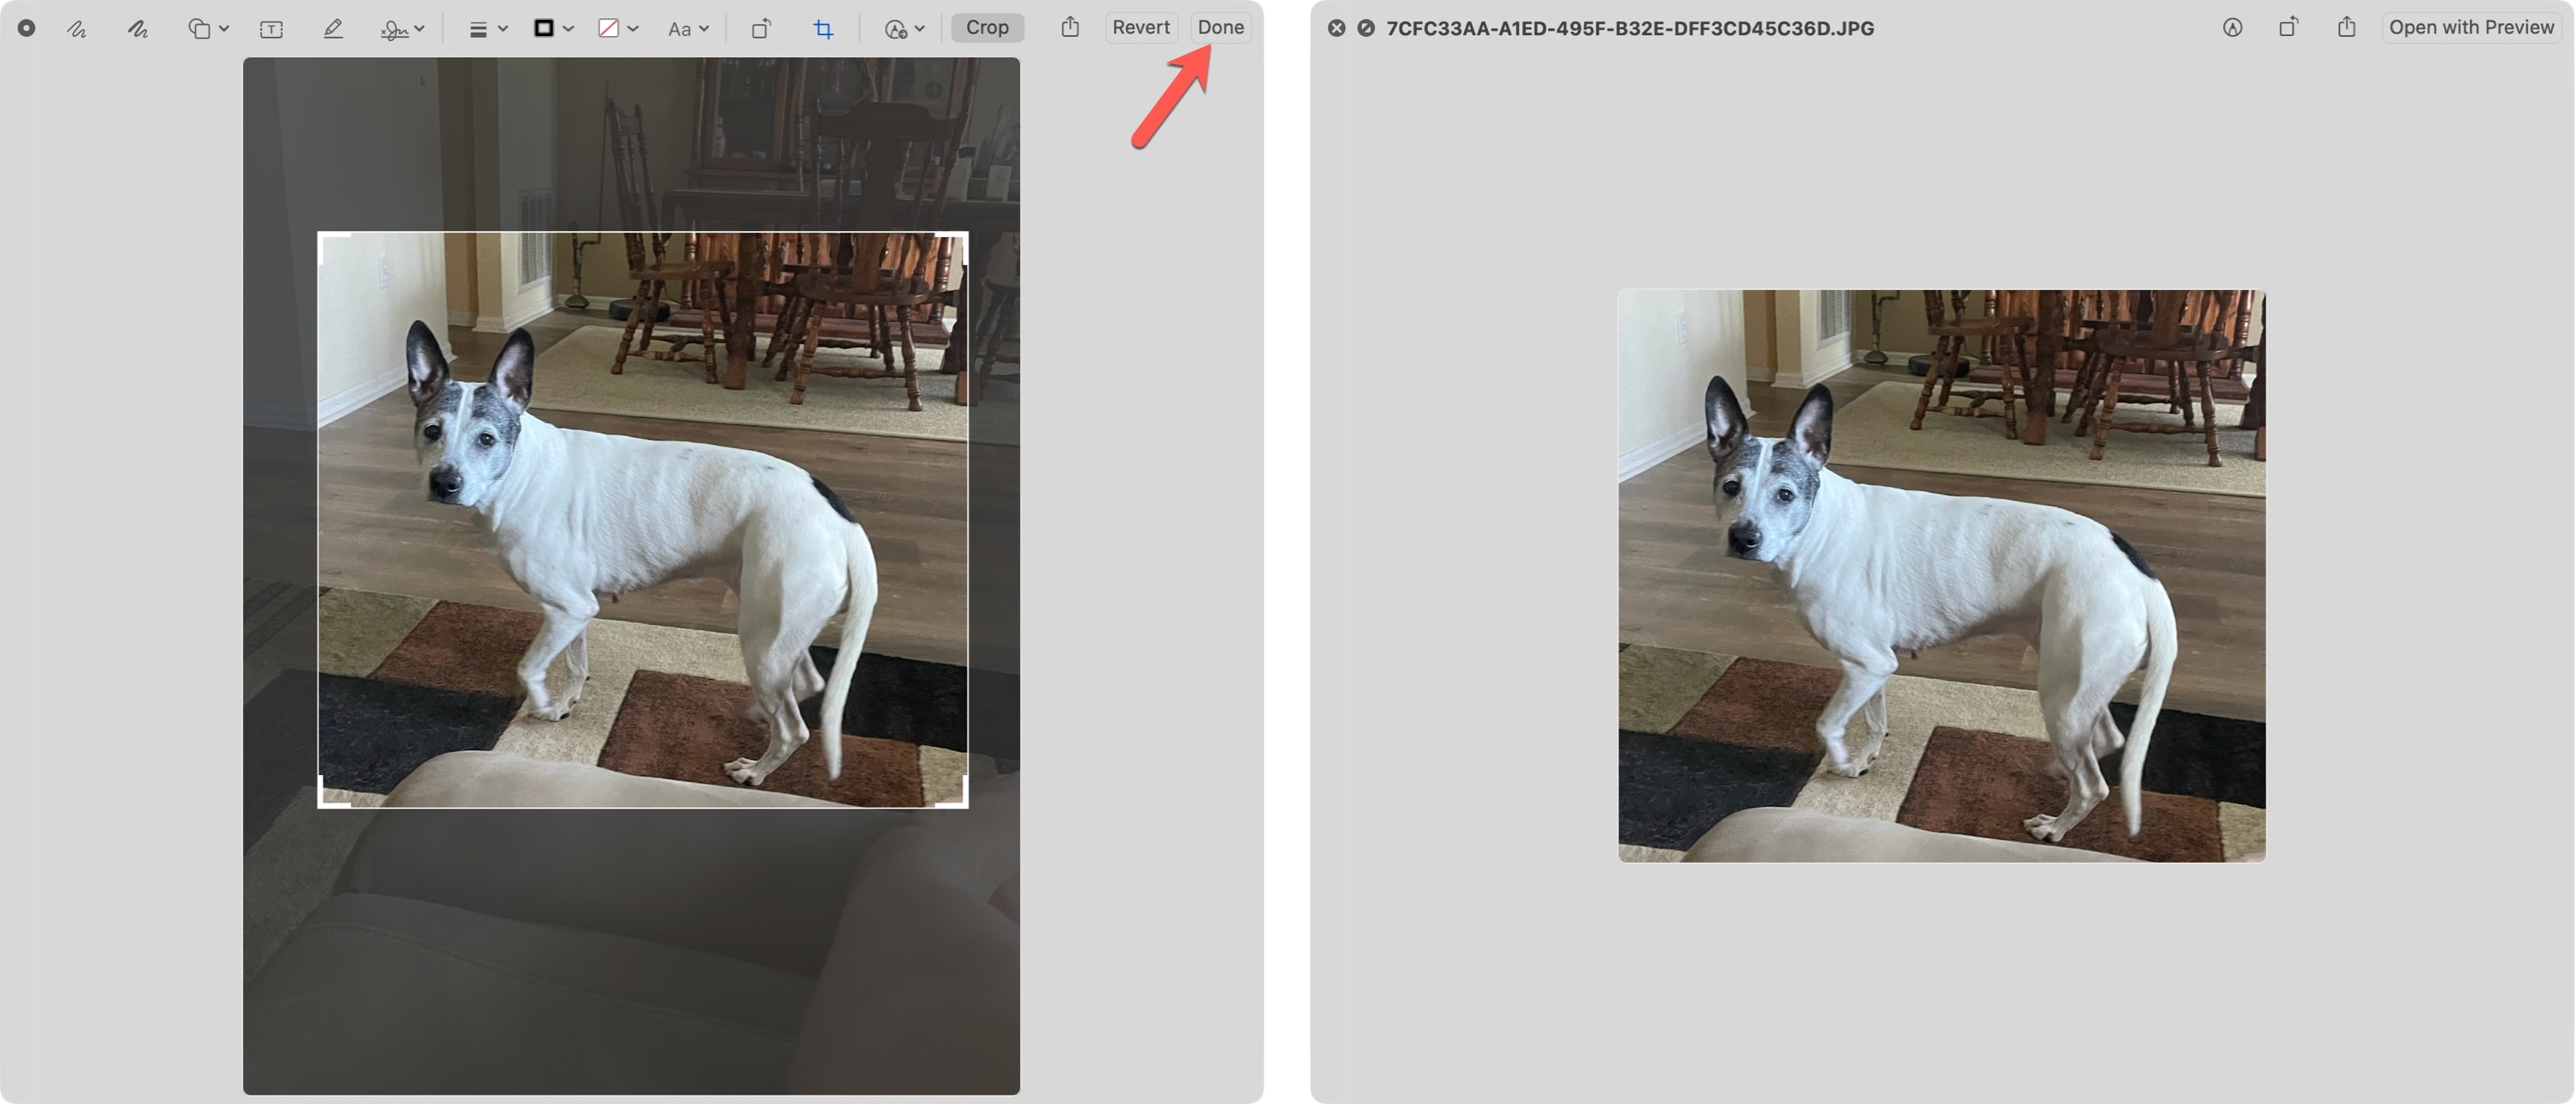 Cropped Image in Quick Look on Mac